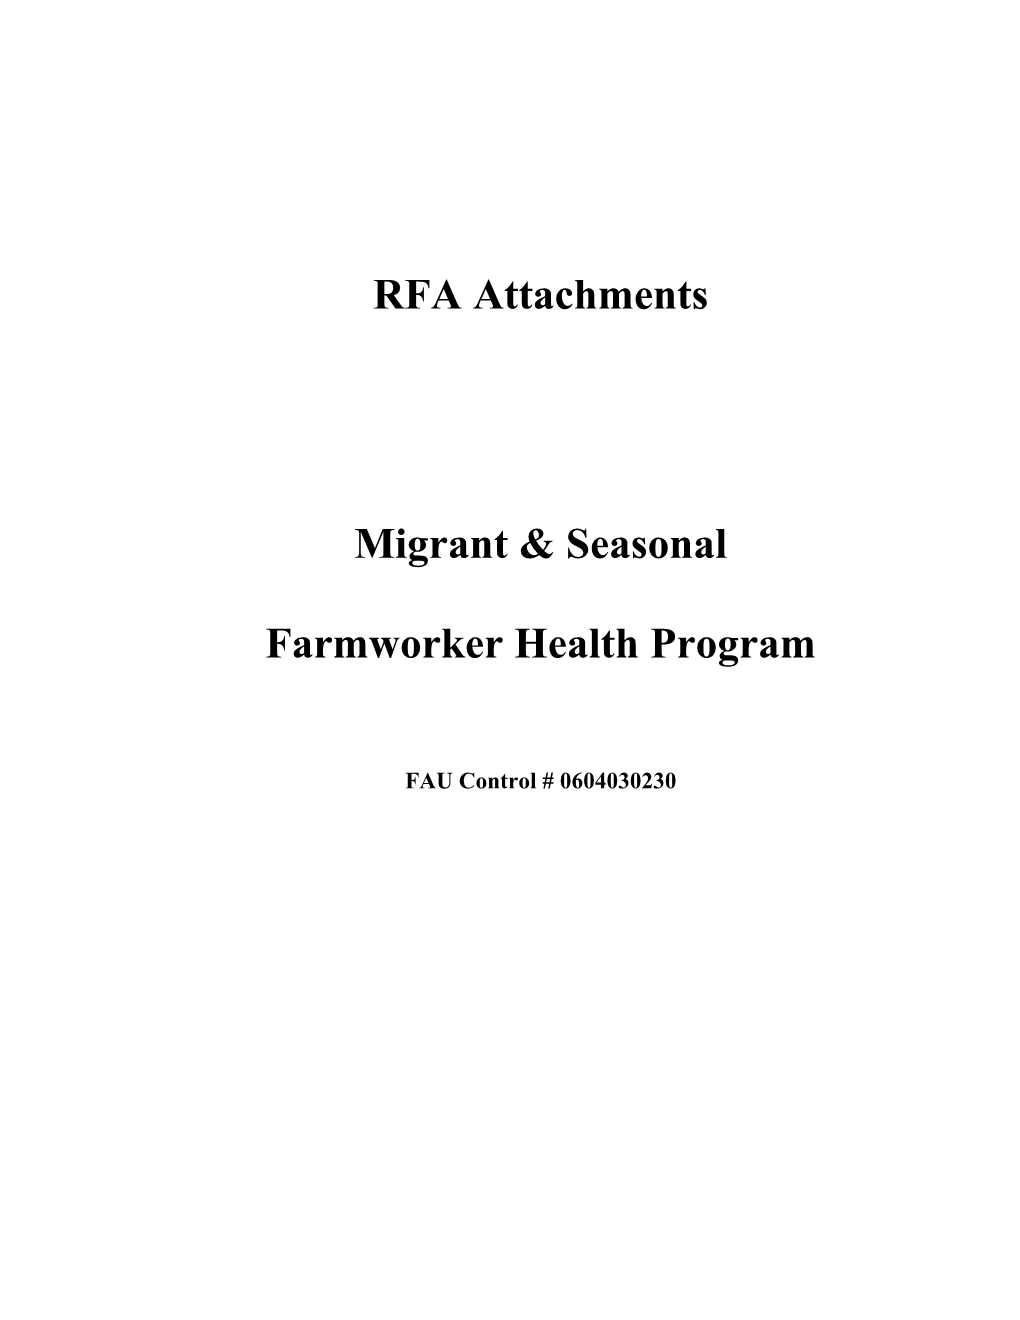 Attachments to Request for Applications - Migrant and Seasonal Farmworker Health Program